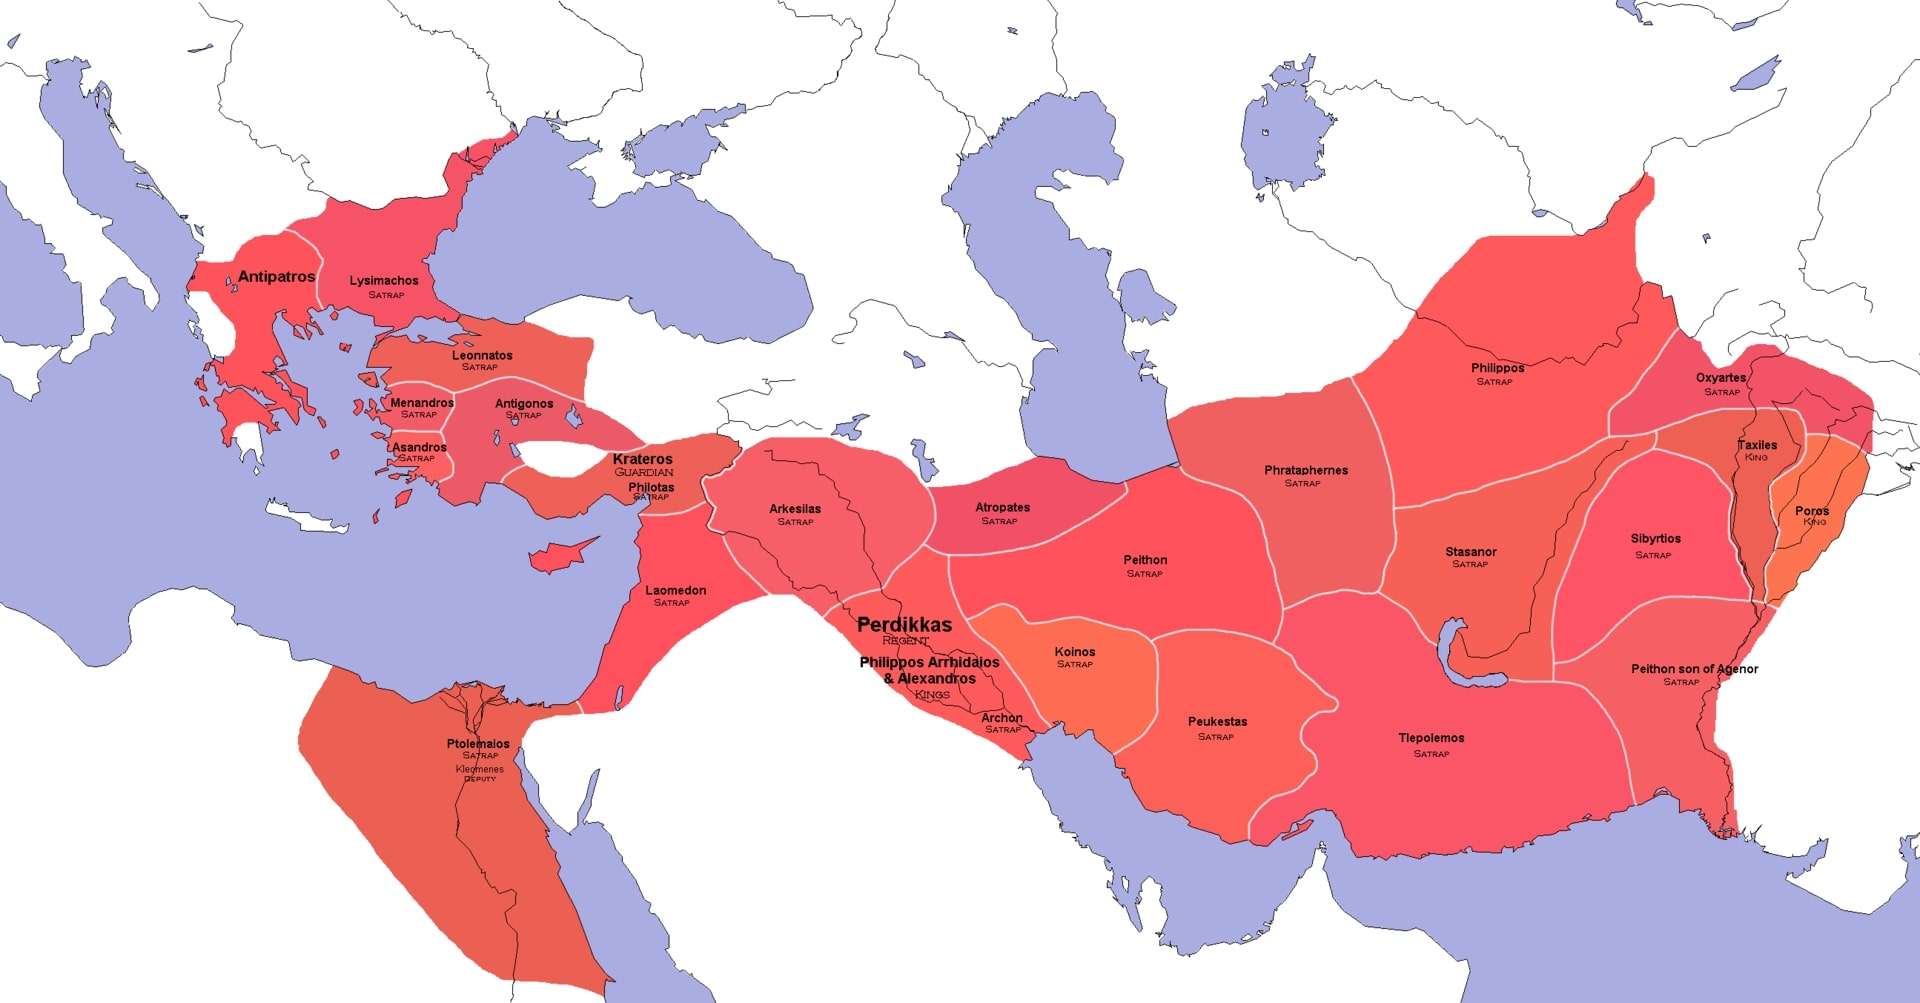 Allocation of key positions and satrapies following the Partition of Babylon in 323 BC after the death of Alexander the Great.